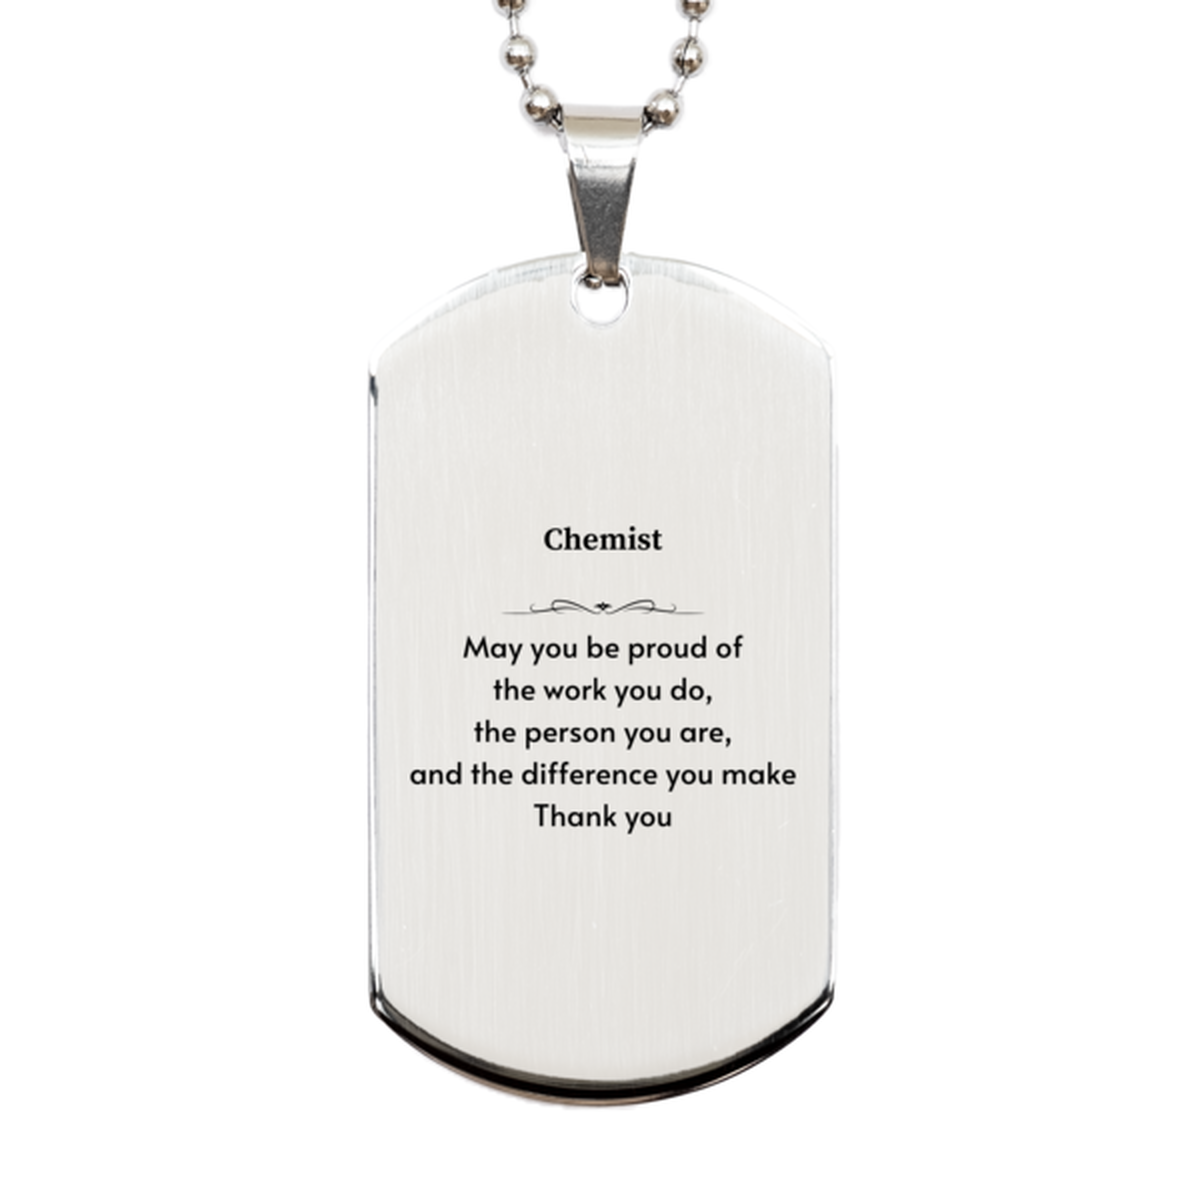 Heartwarming Silver Dog Tag Retirement Coworkers Gifts for Chemist, Chemist May You be proud of the work you do, the person you are Gifts for Boss Men Women Friends